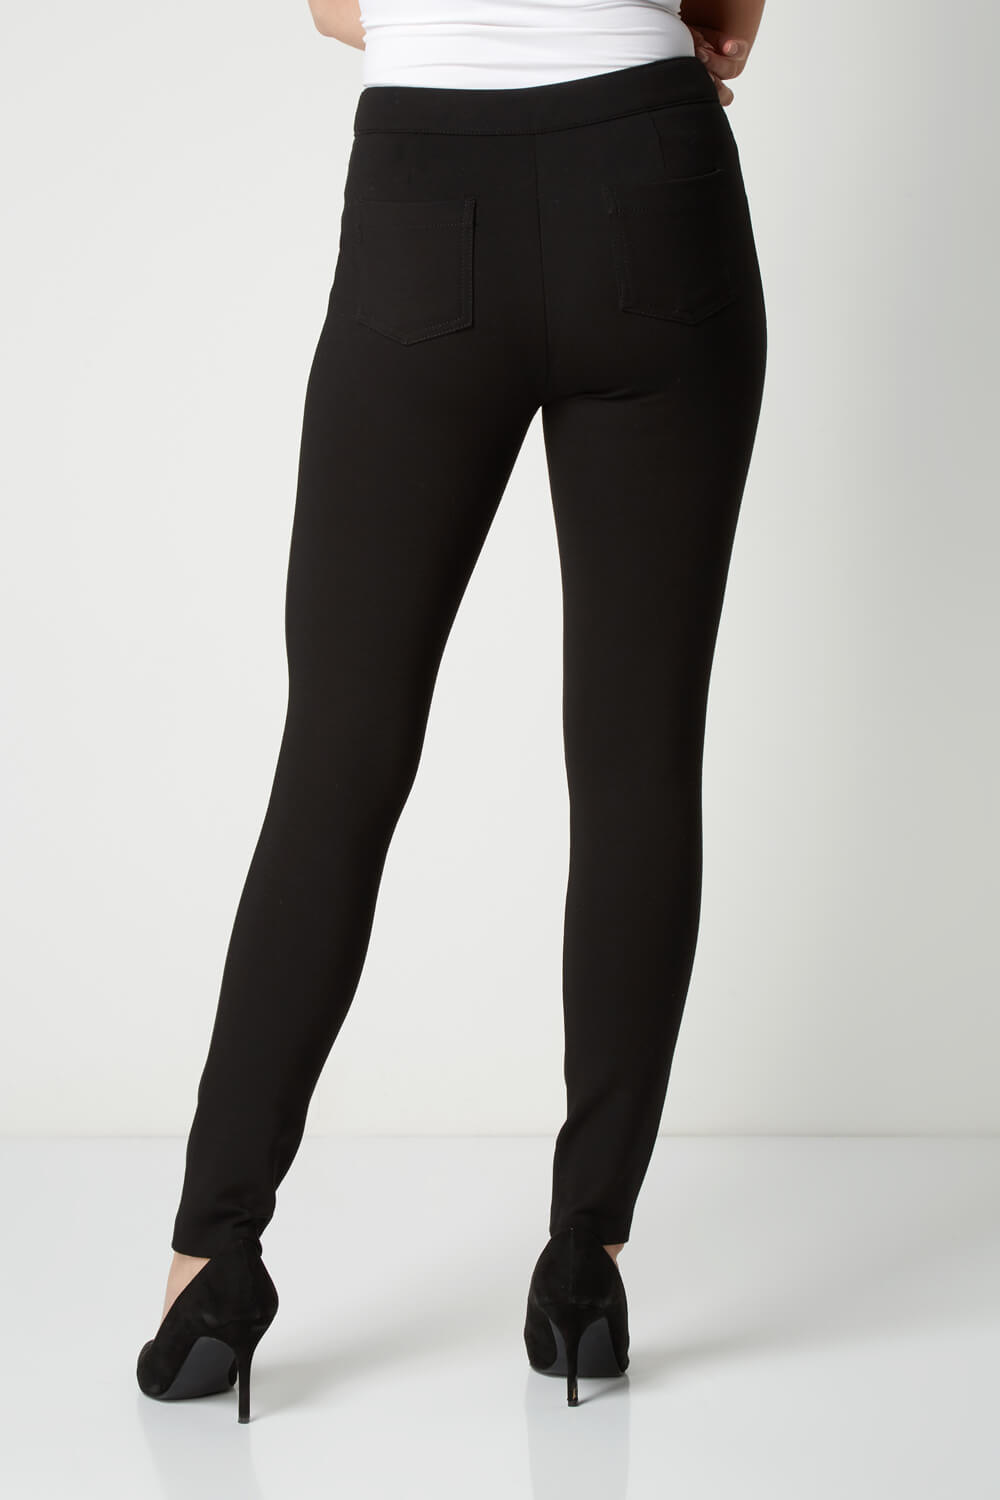 Black Zip Detail Stretch Trouser, Image 2 of 3